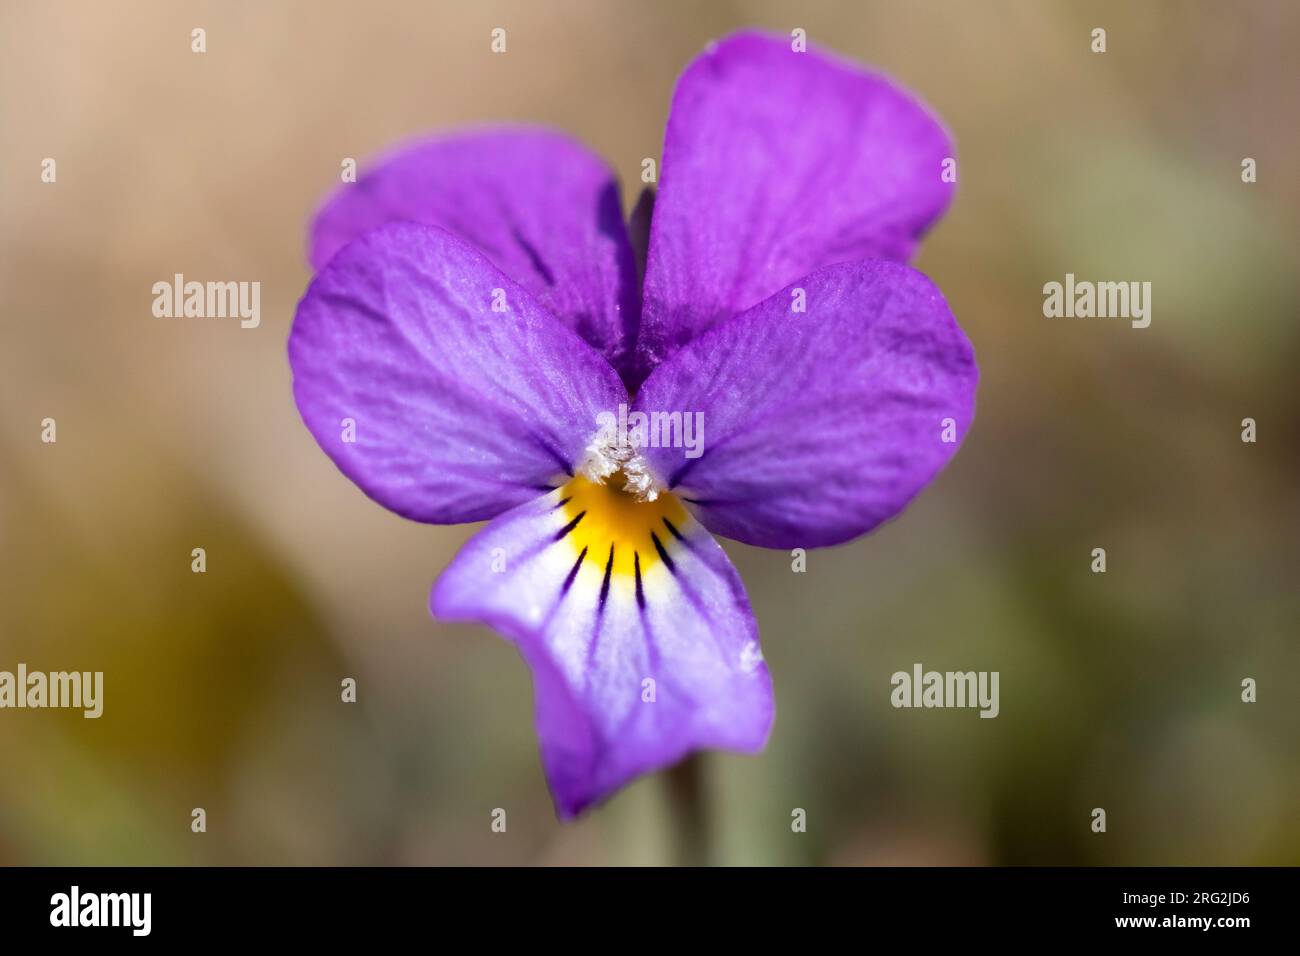 Duinviooltje, Dune Pansy, Viola tricolor subsp. curtisii Stock Photo